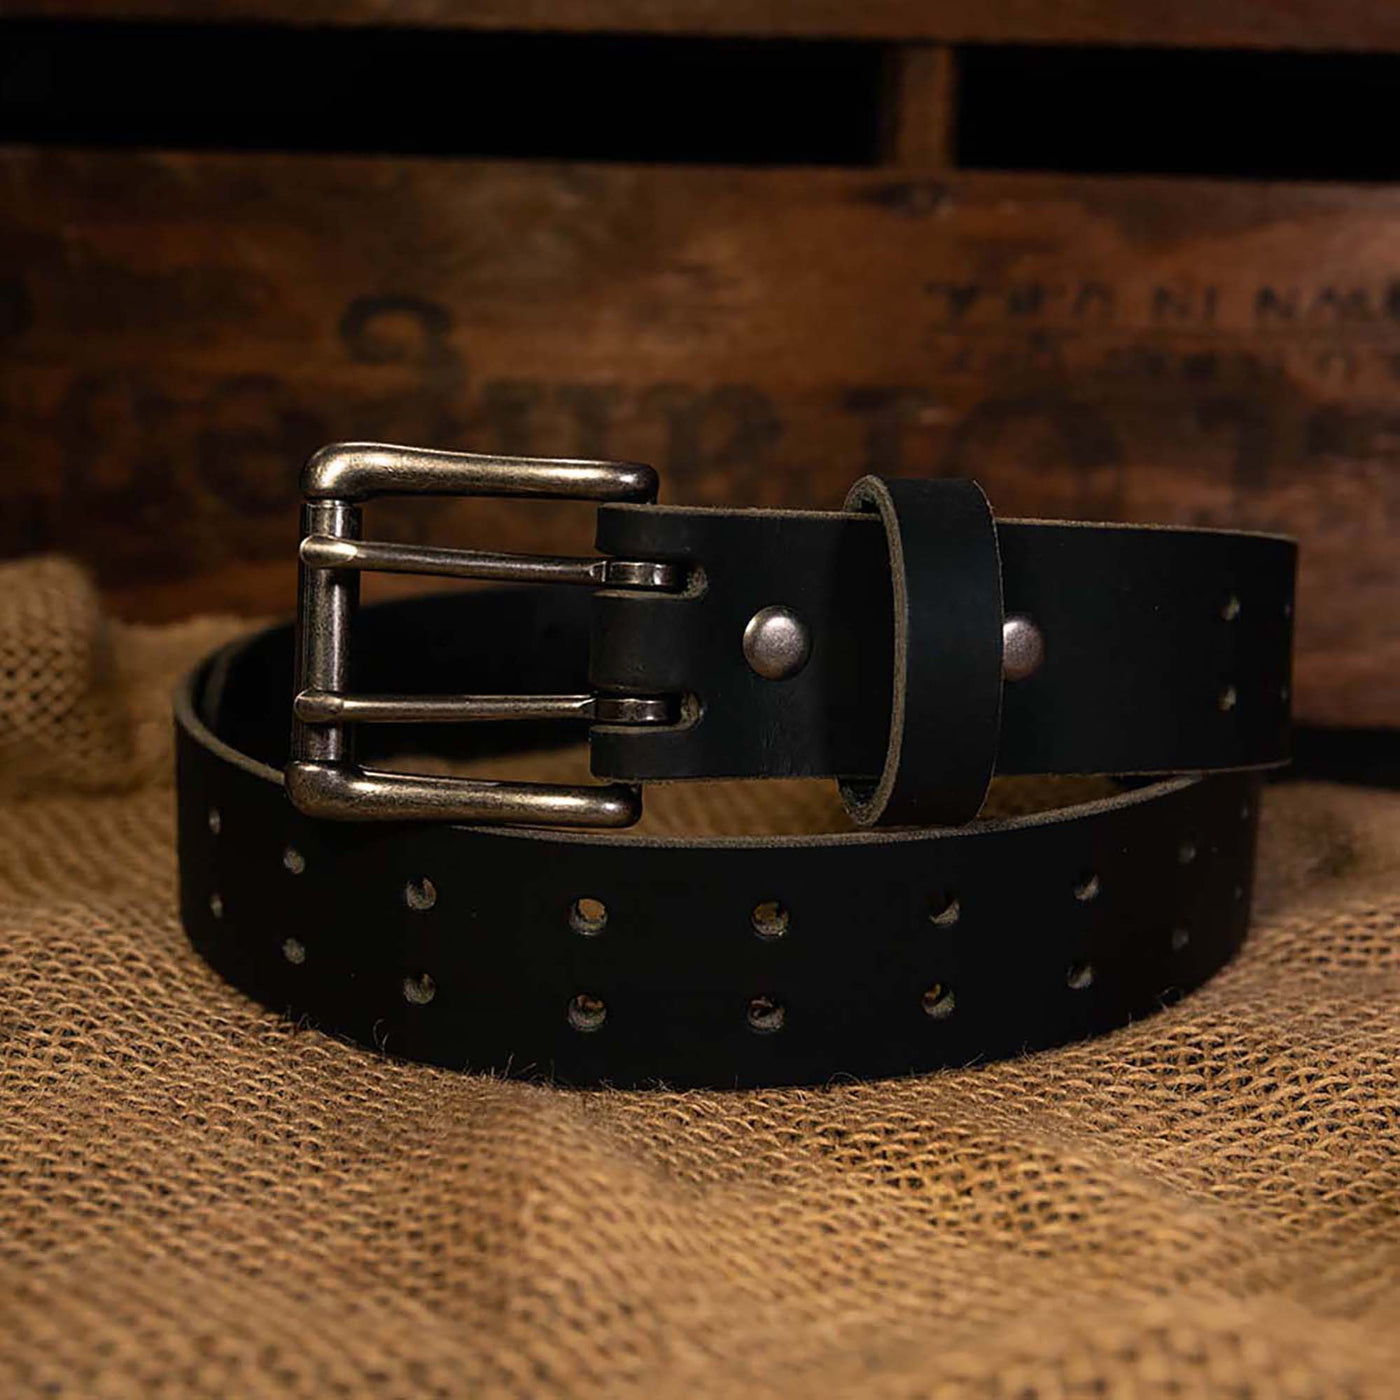 Double Prong Retro Style Leather Belt - 1.5" Matte Nickel Buckle